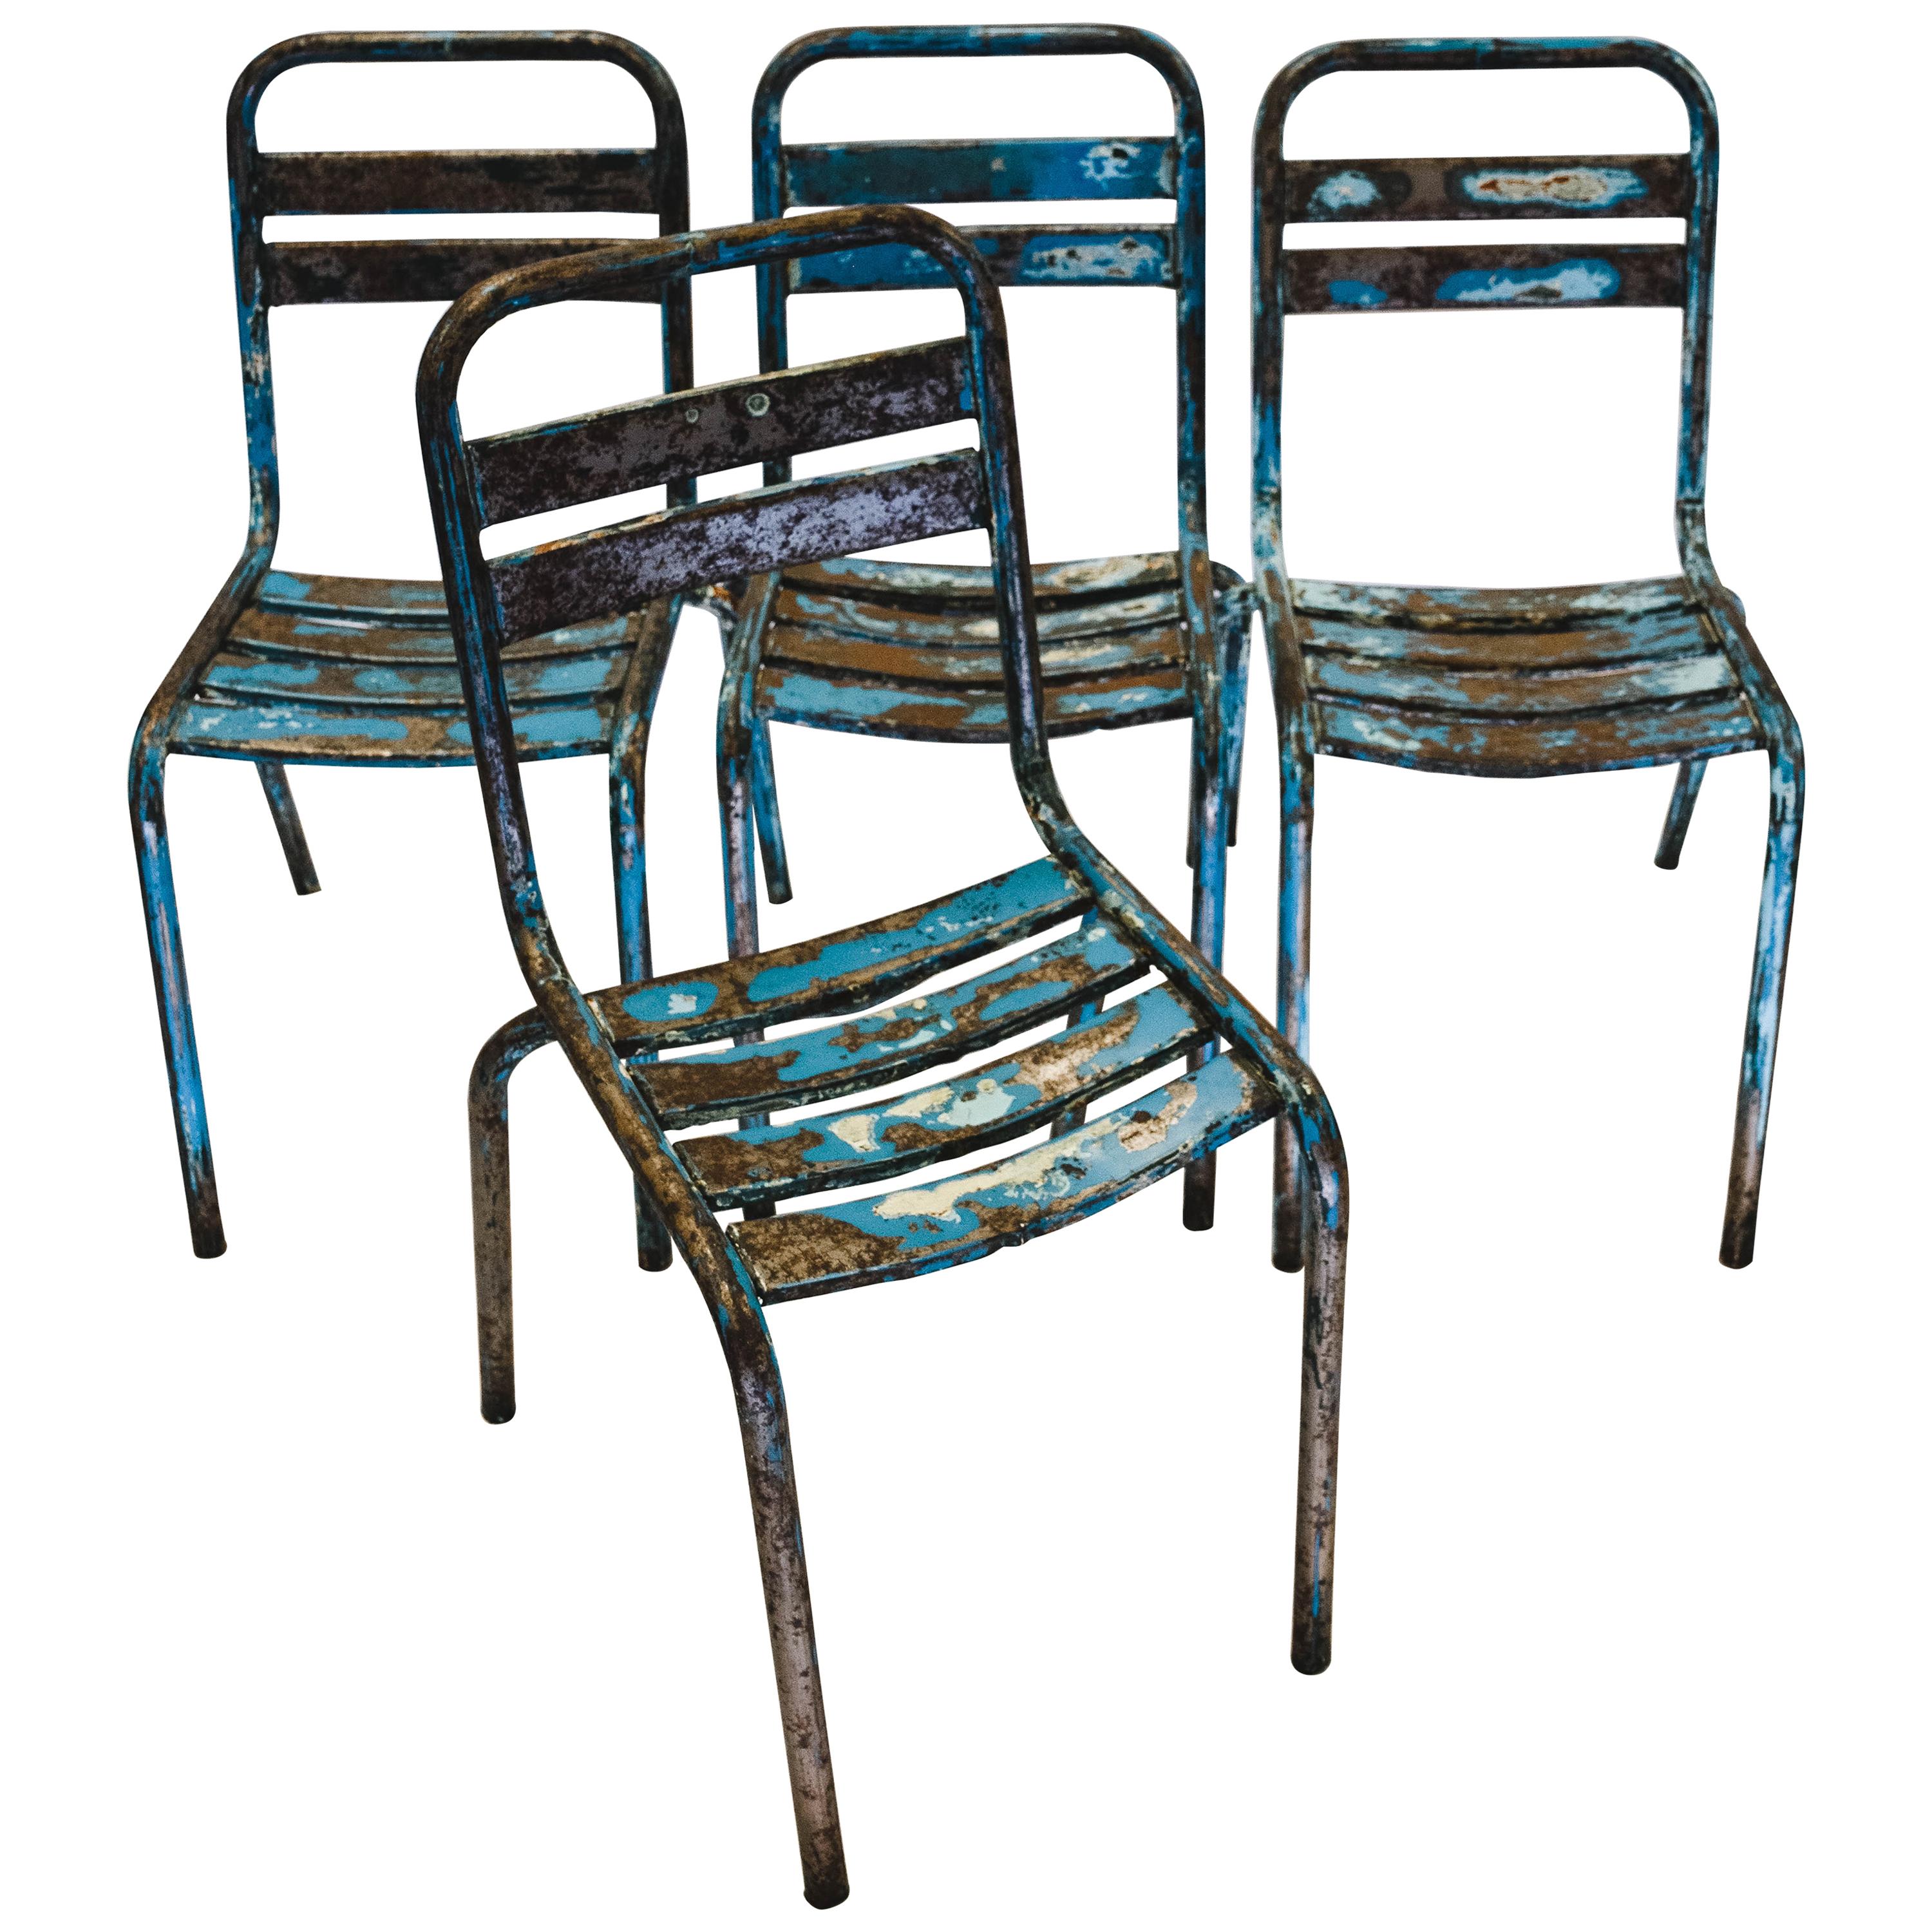 Set of 4 Vintage Metal Cafe Dining Chairs